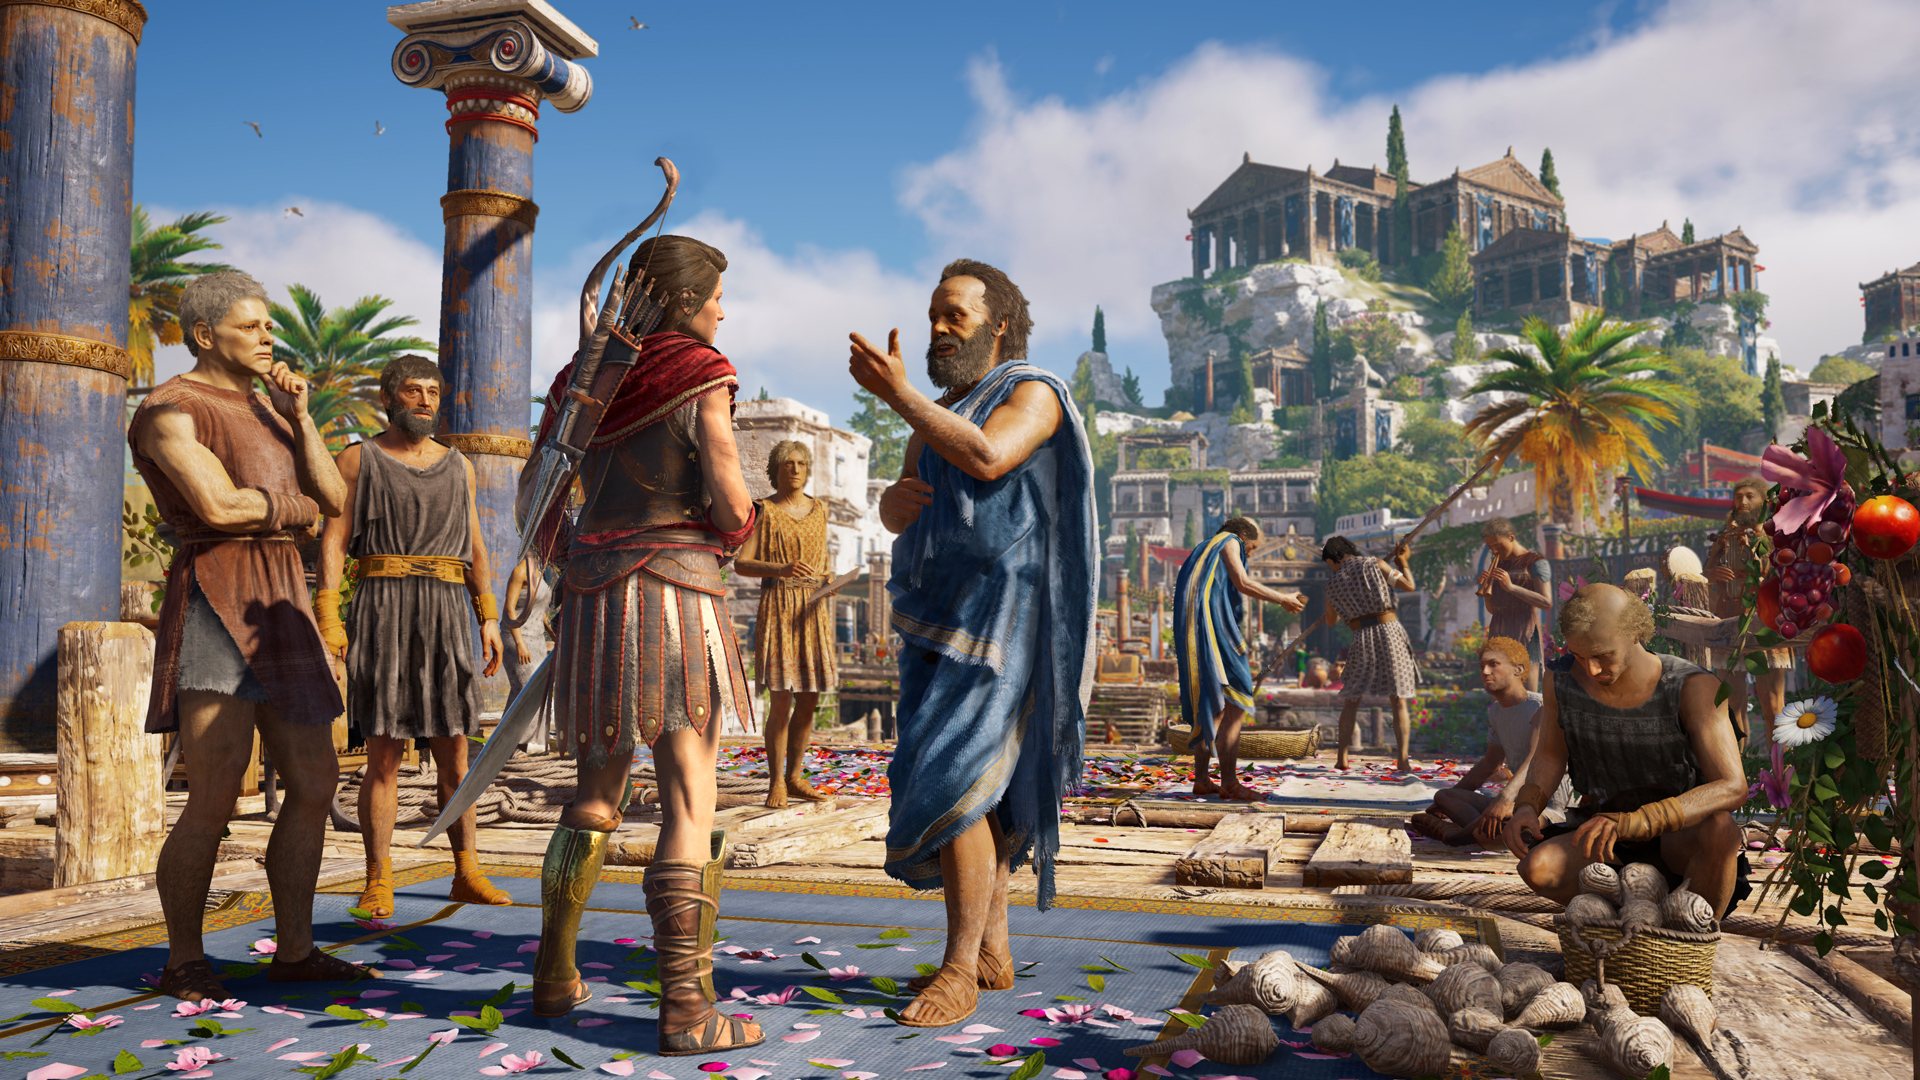 Assassin's Creed Odyssey Ultimate Edition XBOX One / Xbox Series X,S Account